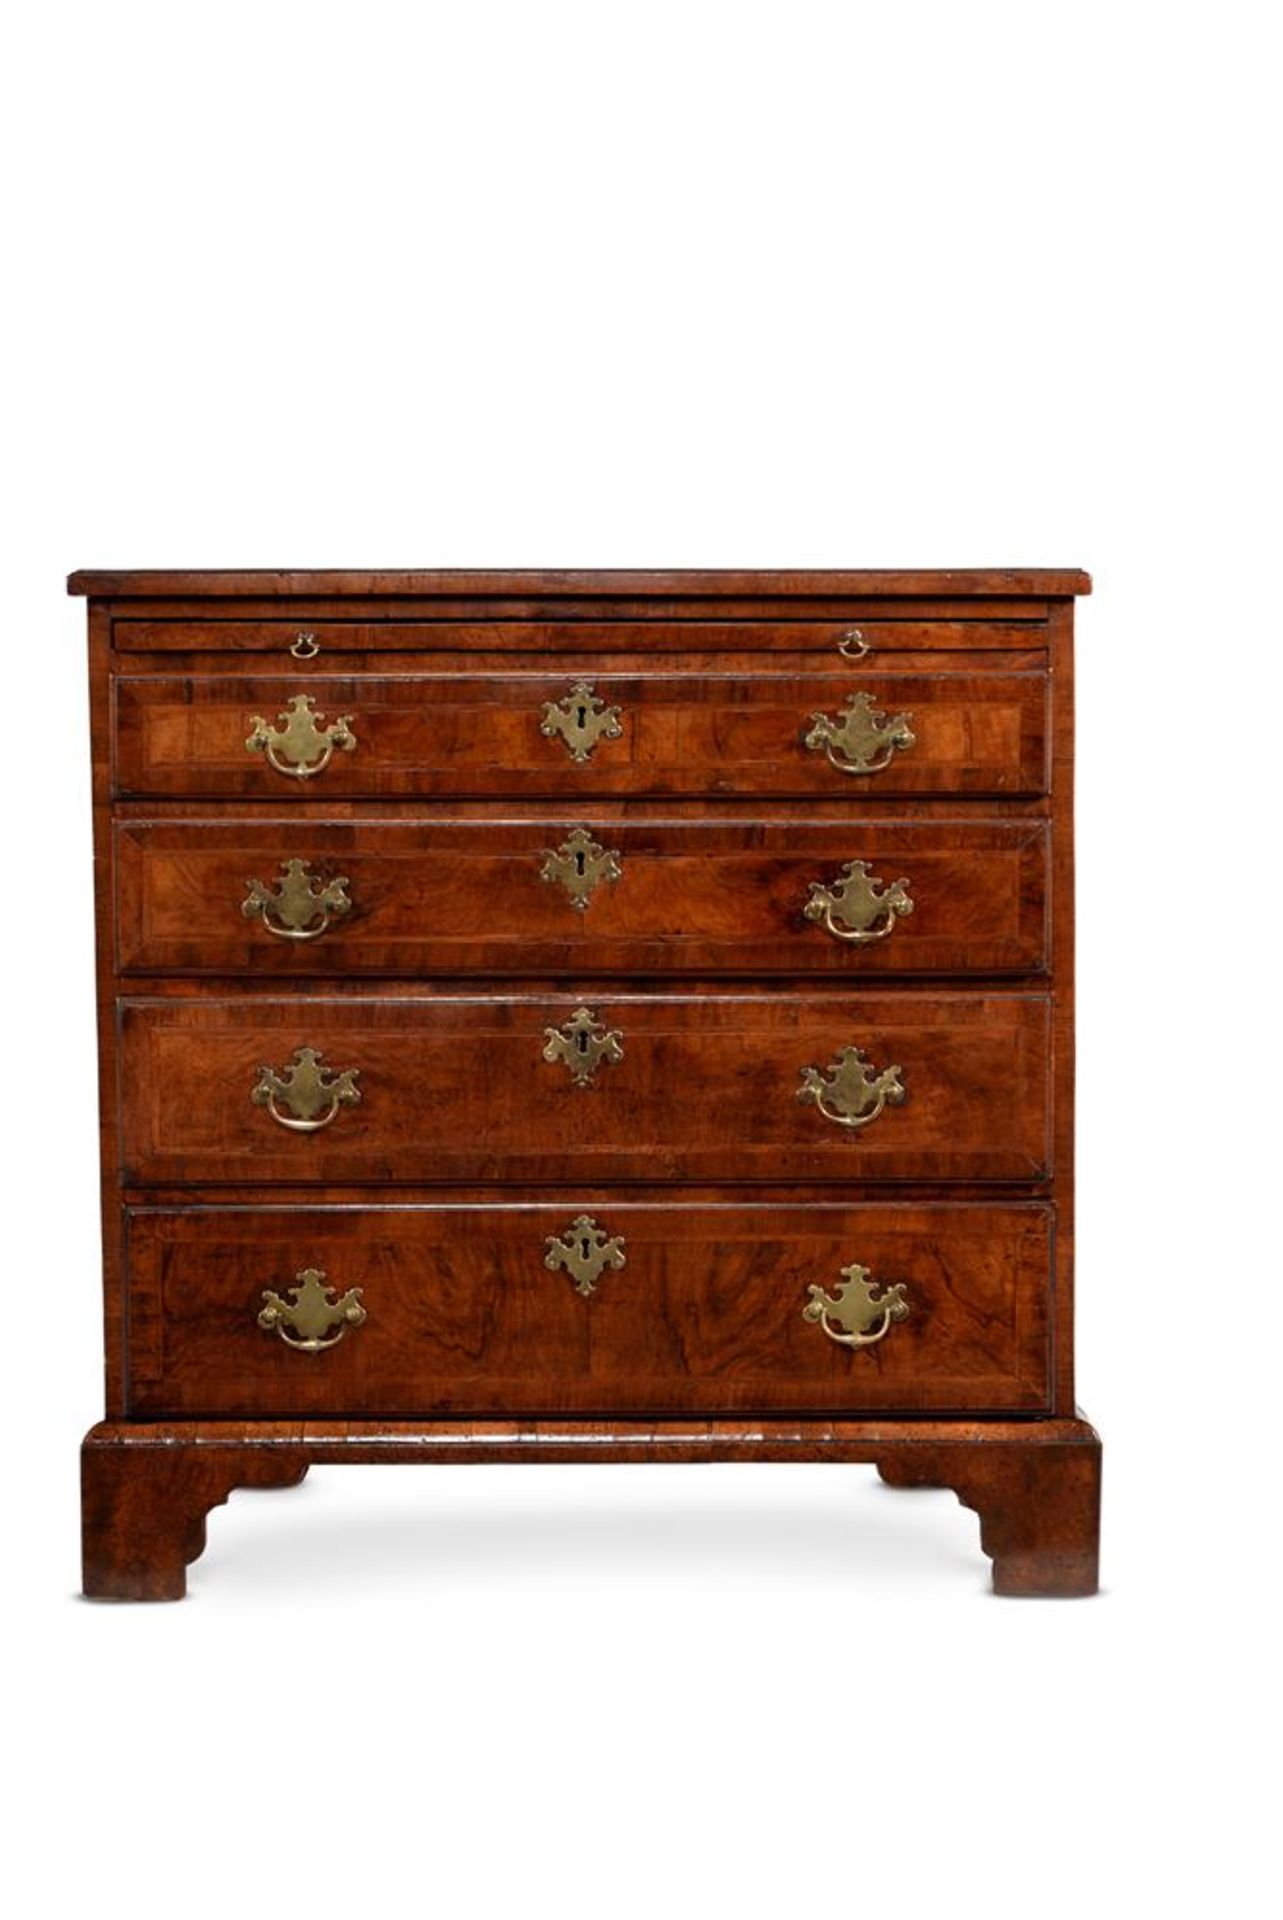 A GEORGE II WALNUT AND FEATHERBANDED CHEST OF DRAWERS, SECOND QUARTER 18TH CENTURY